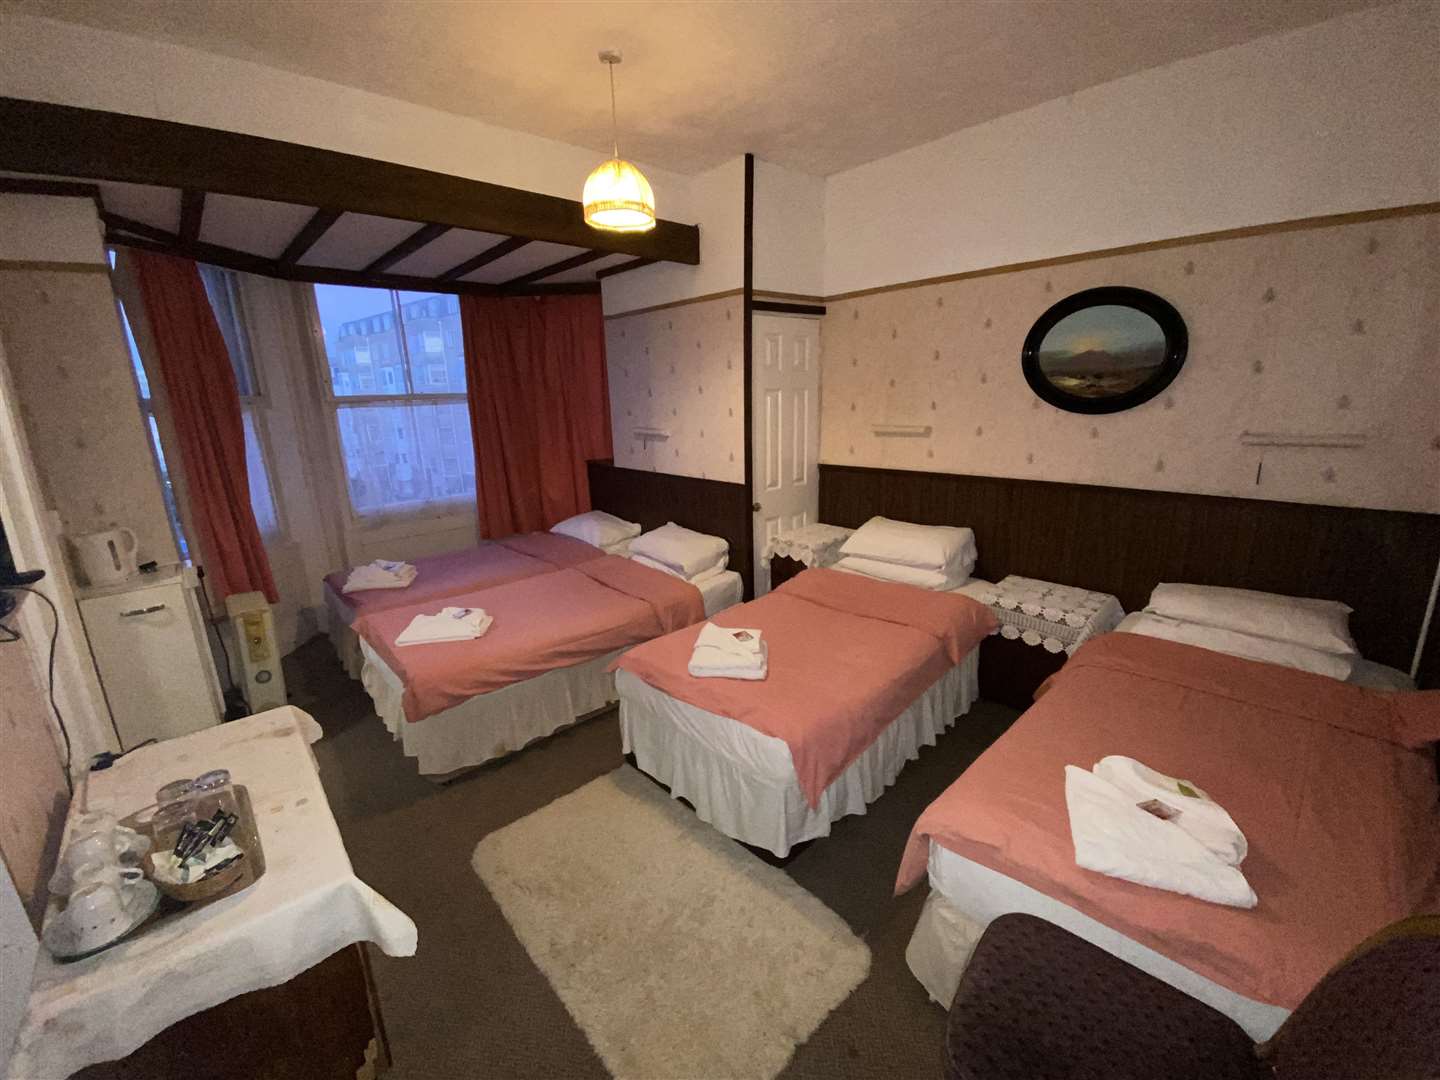 At £78 a night, this was the four-bed room we got at The Windsor